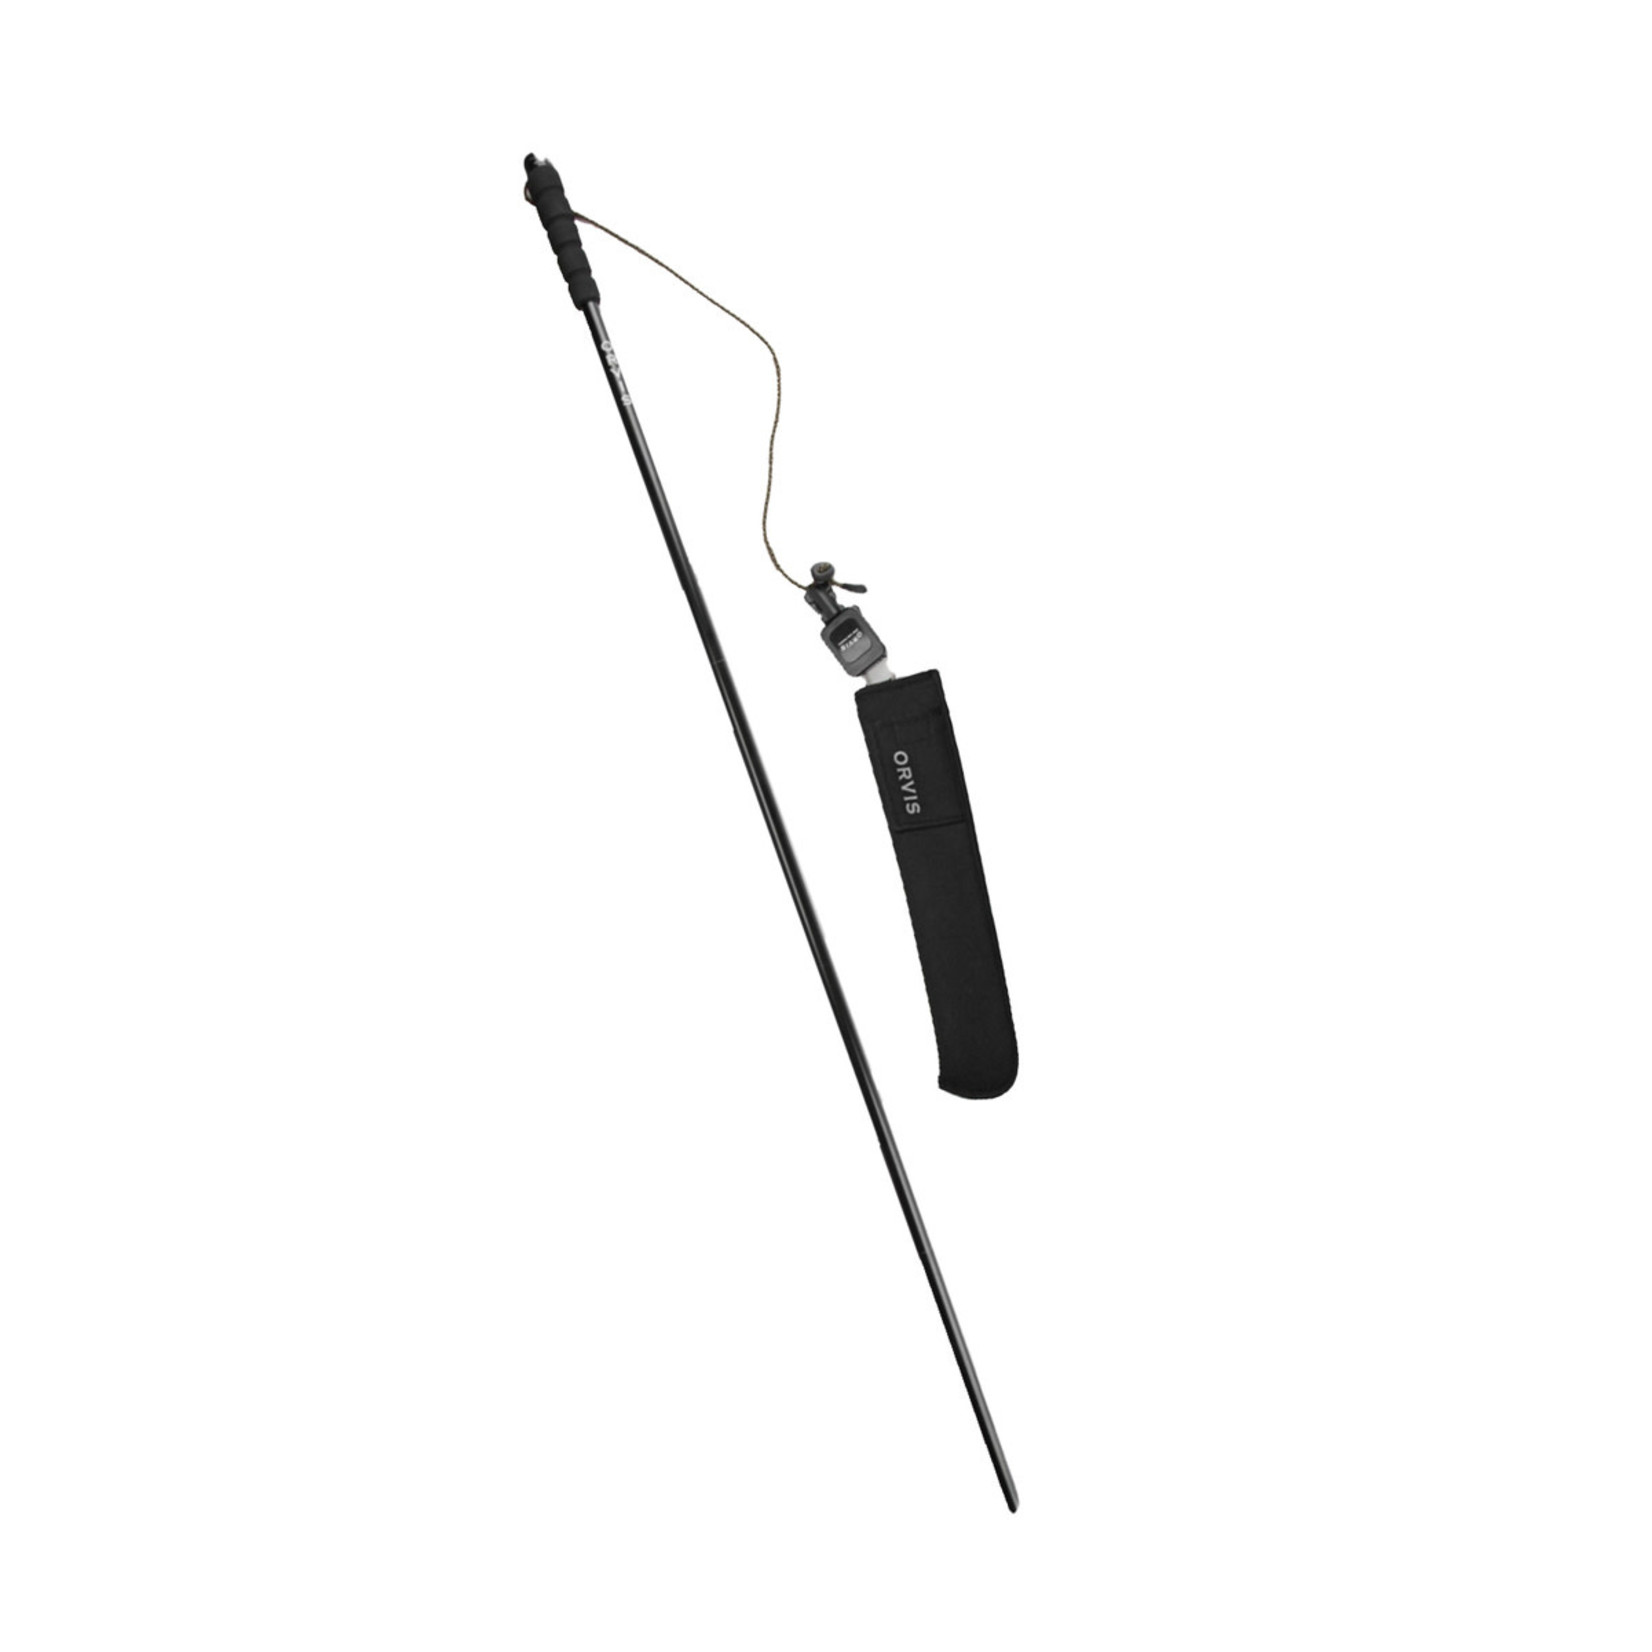 Orvis Ripcord Wading Staff - Black Dog Outdoor Sports